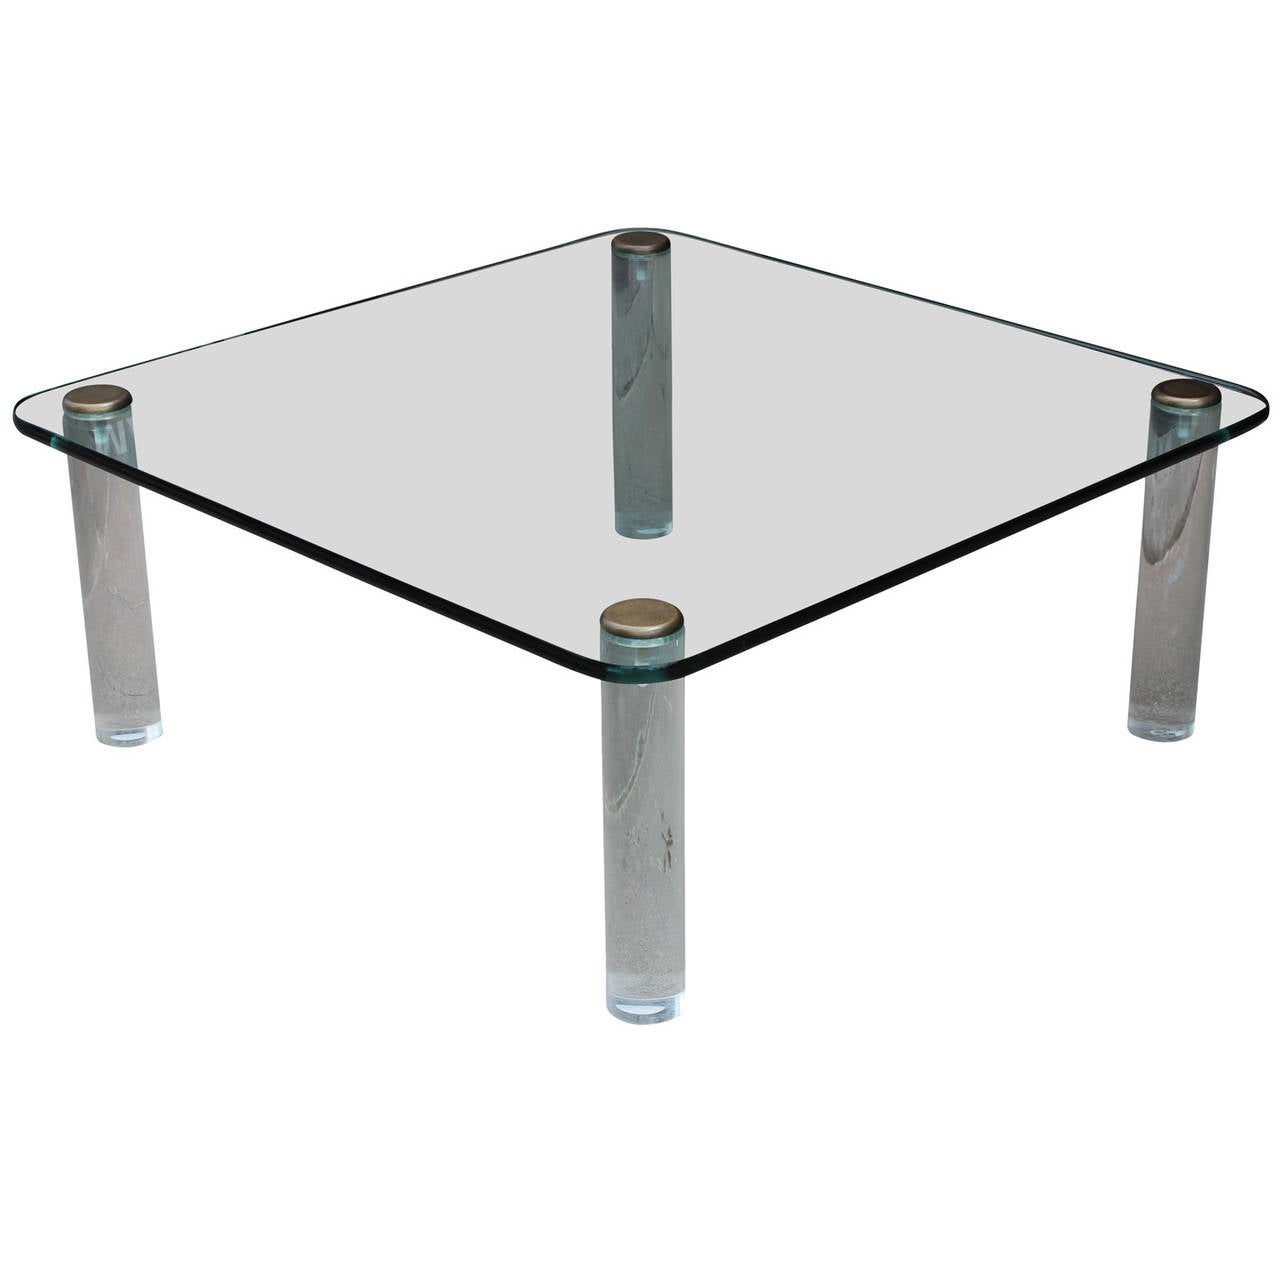 Great Charles Hollis Jones style lucite square coffee table with a glass top. Lucite legs are finished with a heavy solid brass cap. Table is probably made by Pace Collection. In excellent vintage condition.